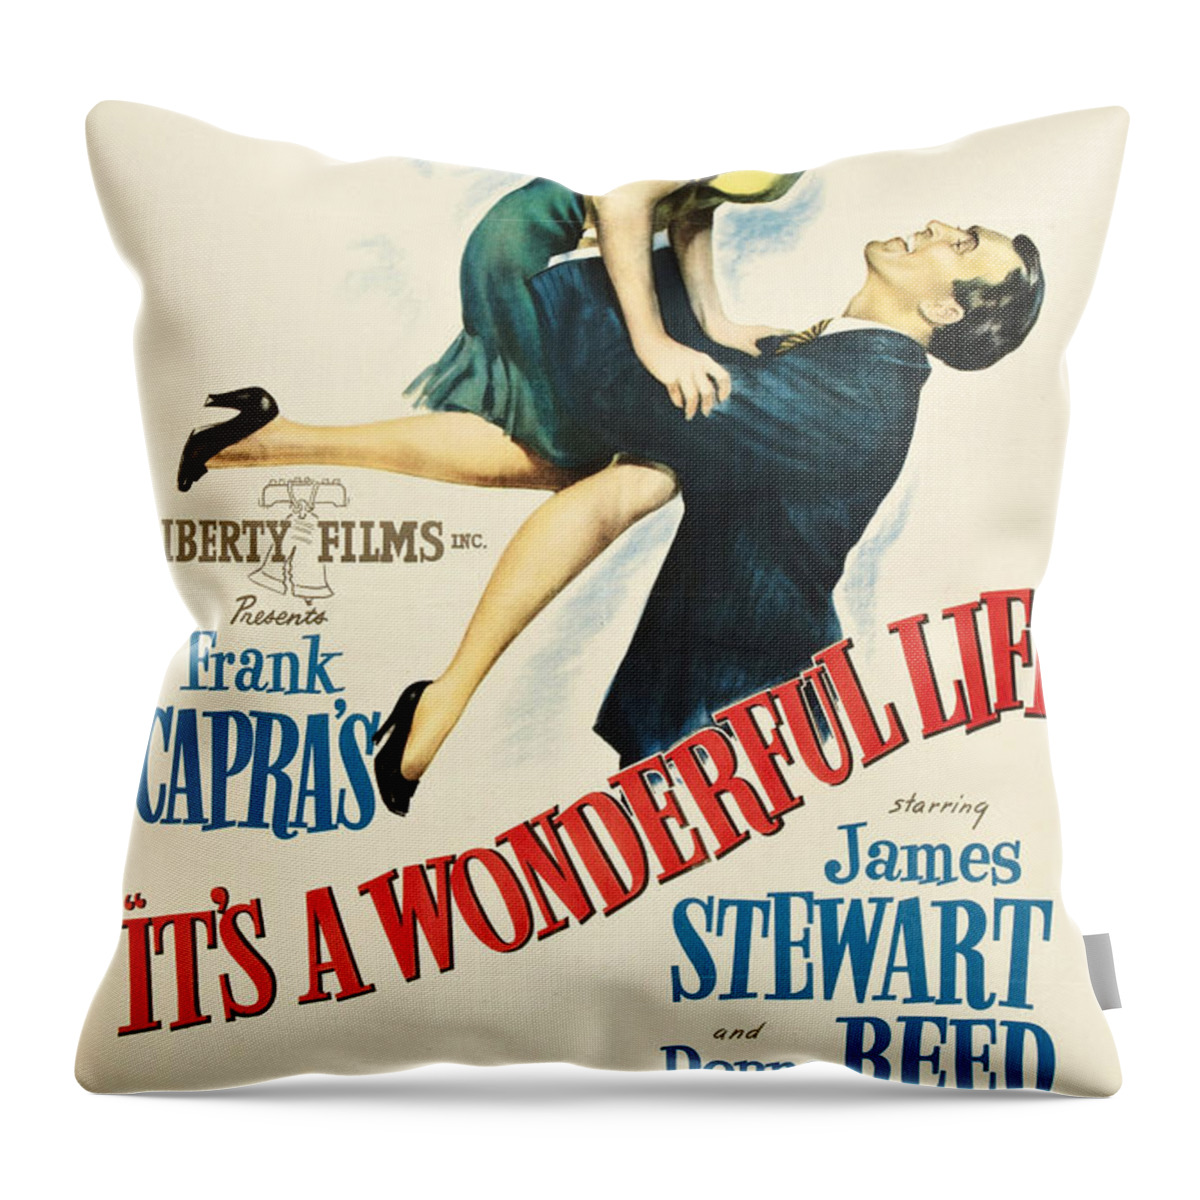 Its A Wonderful Life Throw Pillow featuring the digital art It's a Wonderful Life by Georgia Fowler